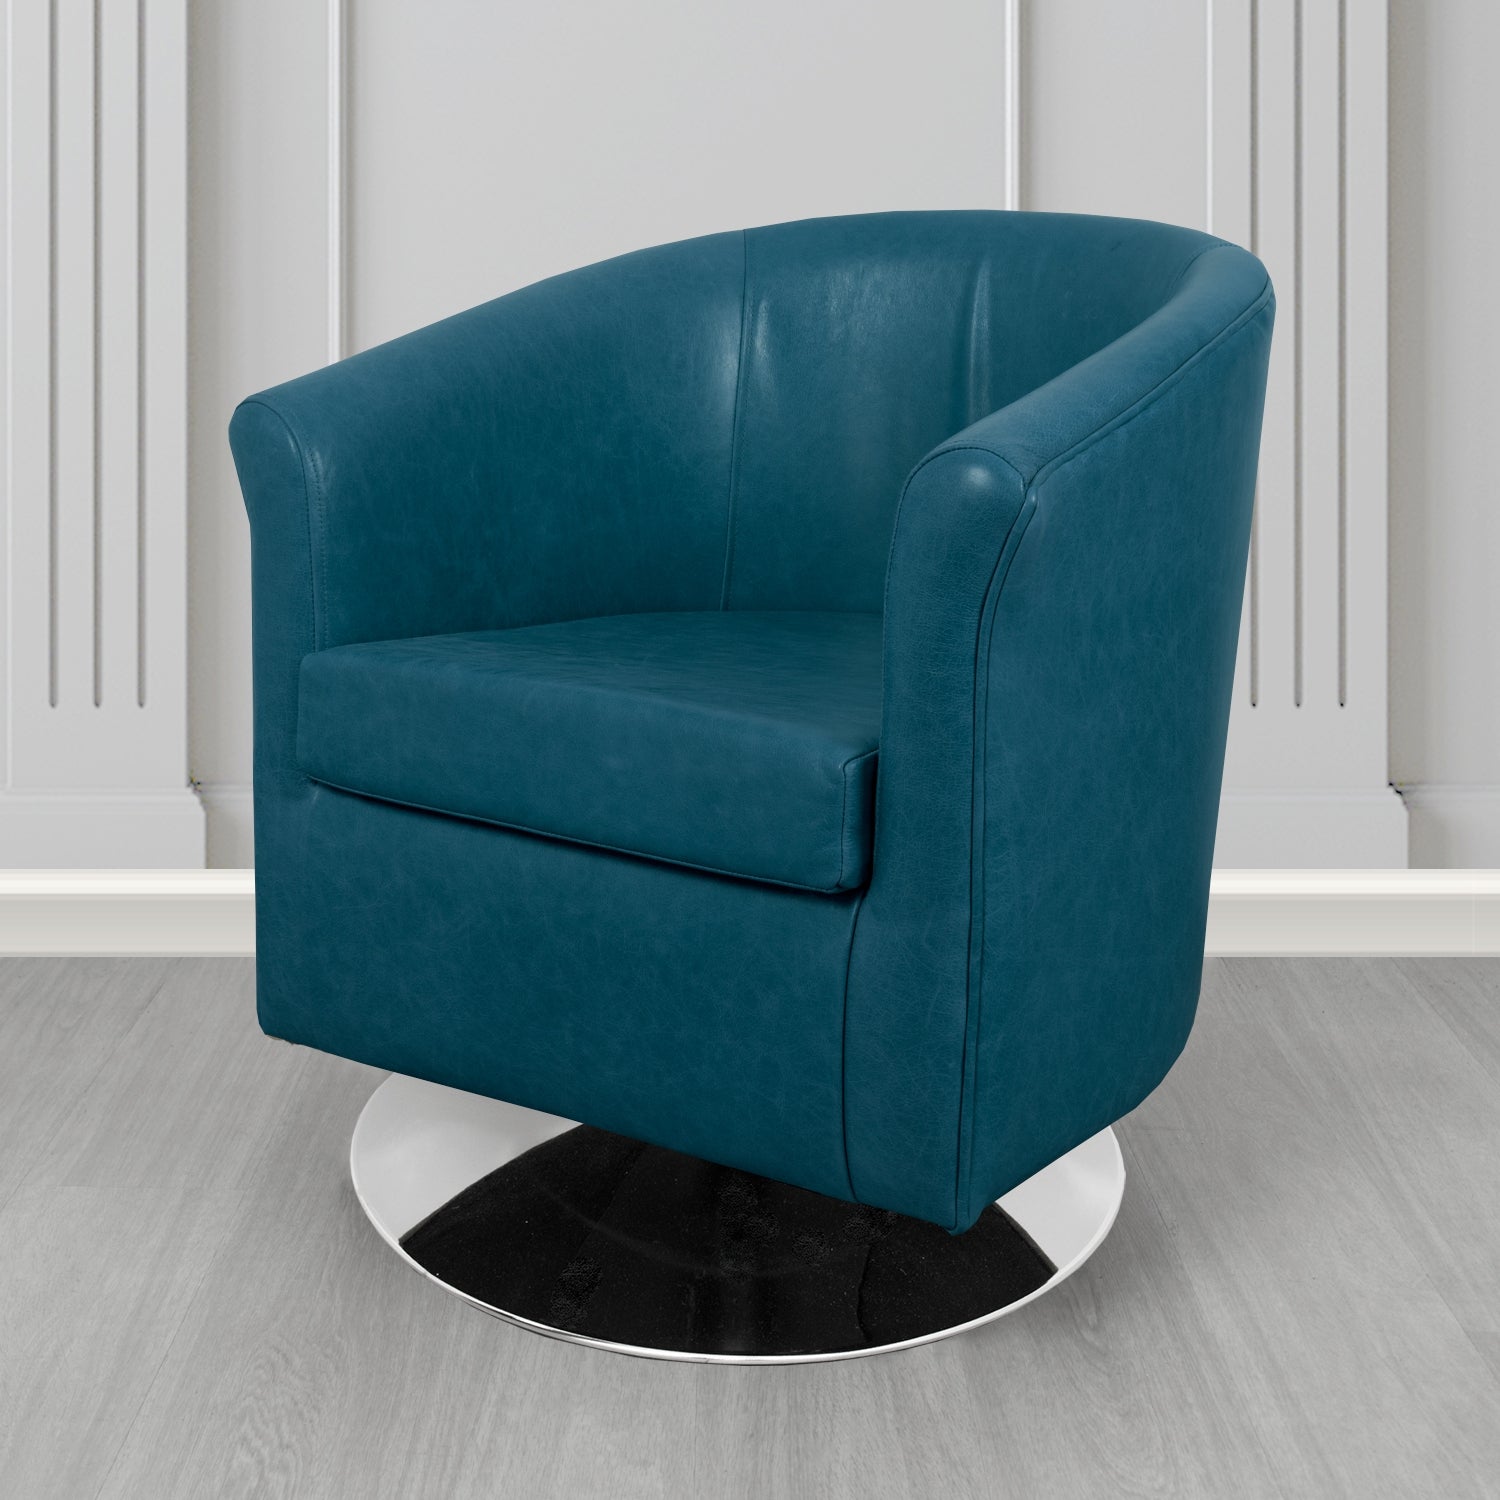 Tuscany Swivel Tub Chair in Crib 5 Old English Peacock Blue Genuine Leather - The Tub Chair Shop